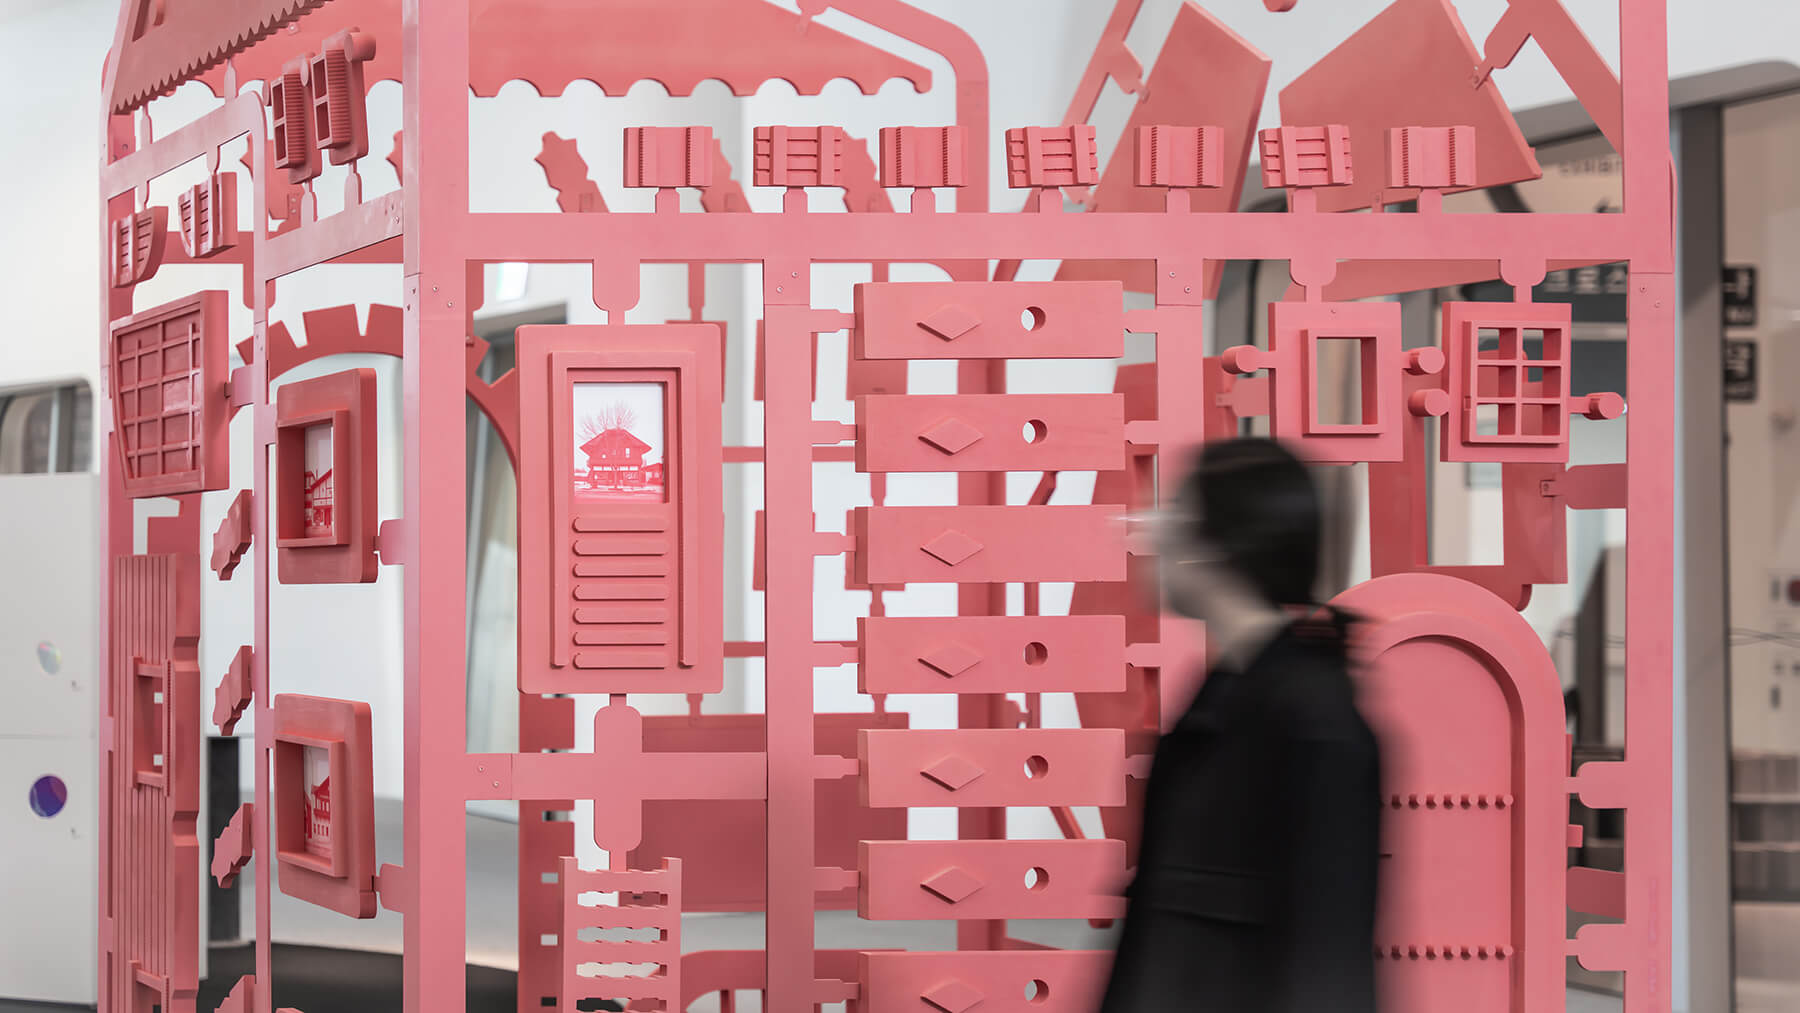 a coral-painted, chalet-inspired installation at an exhibition, fabricating swissness